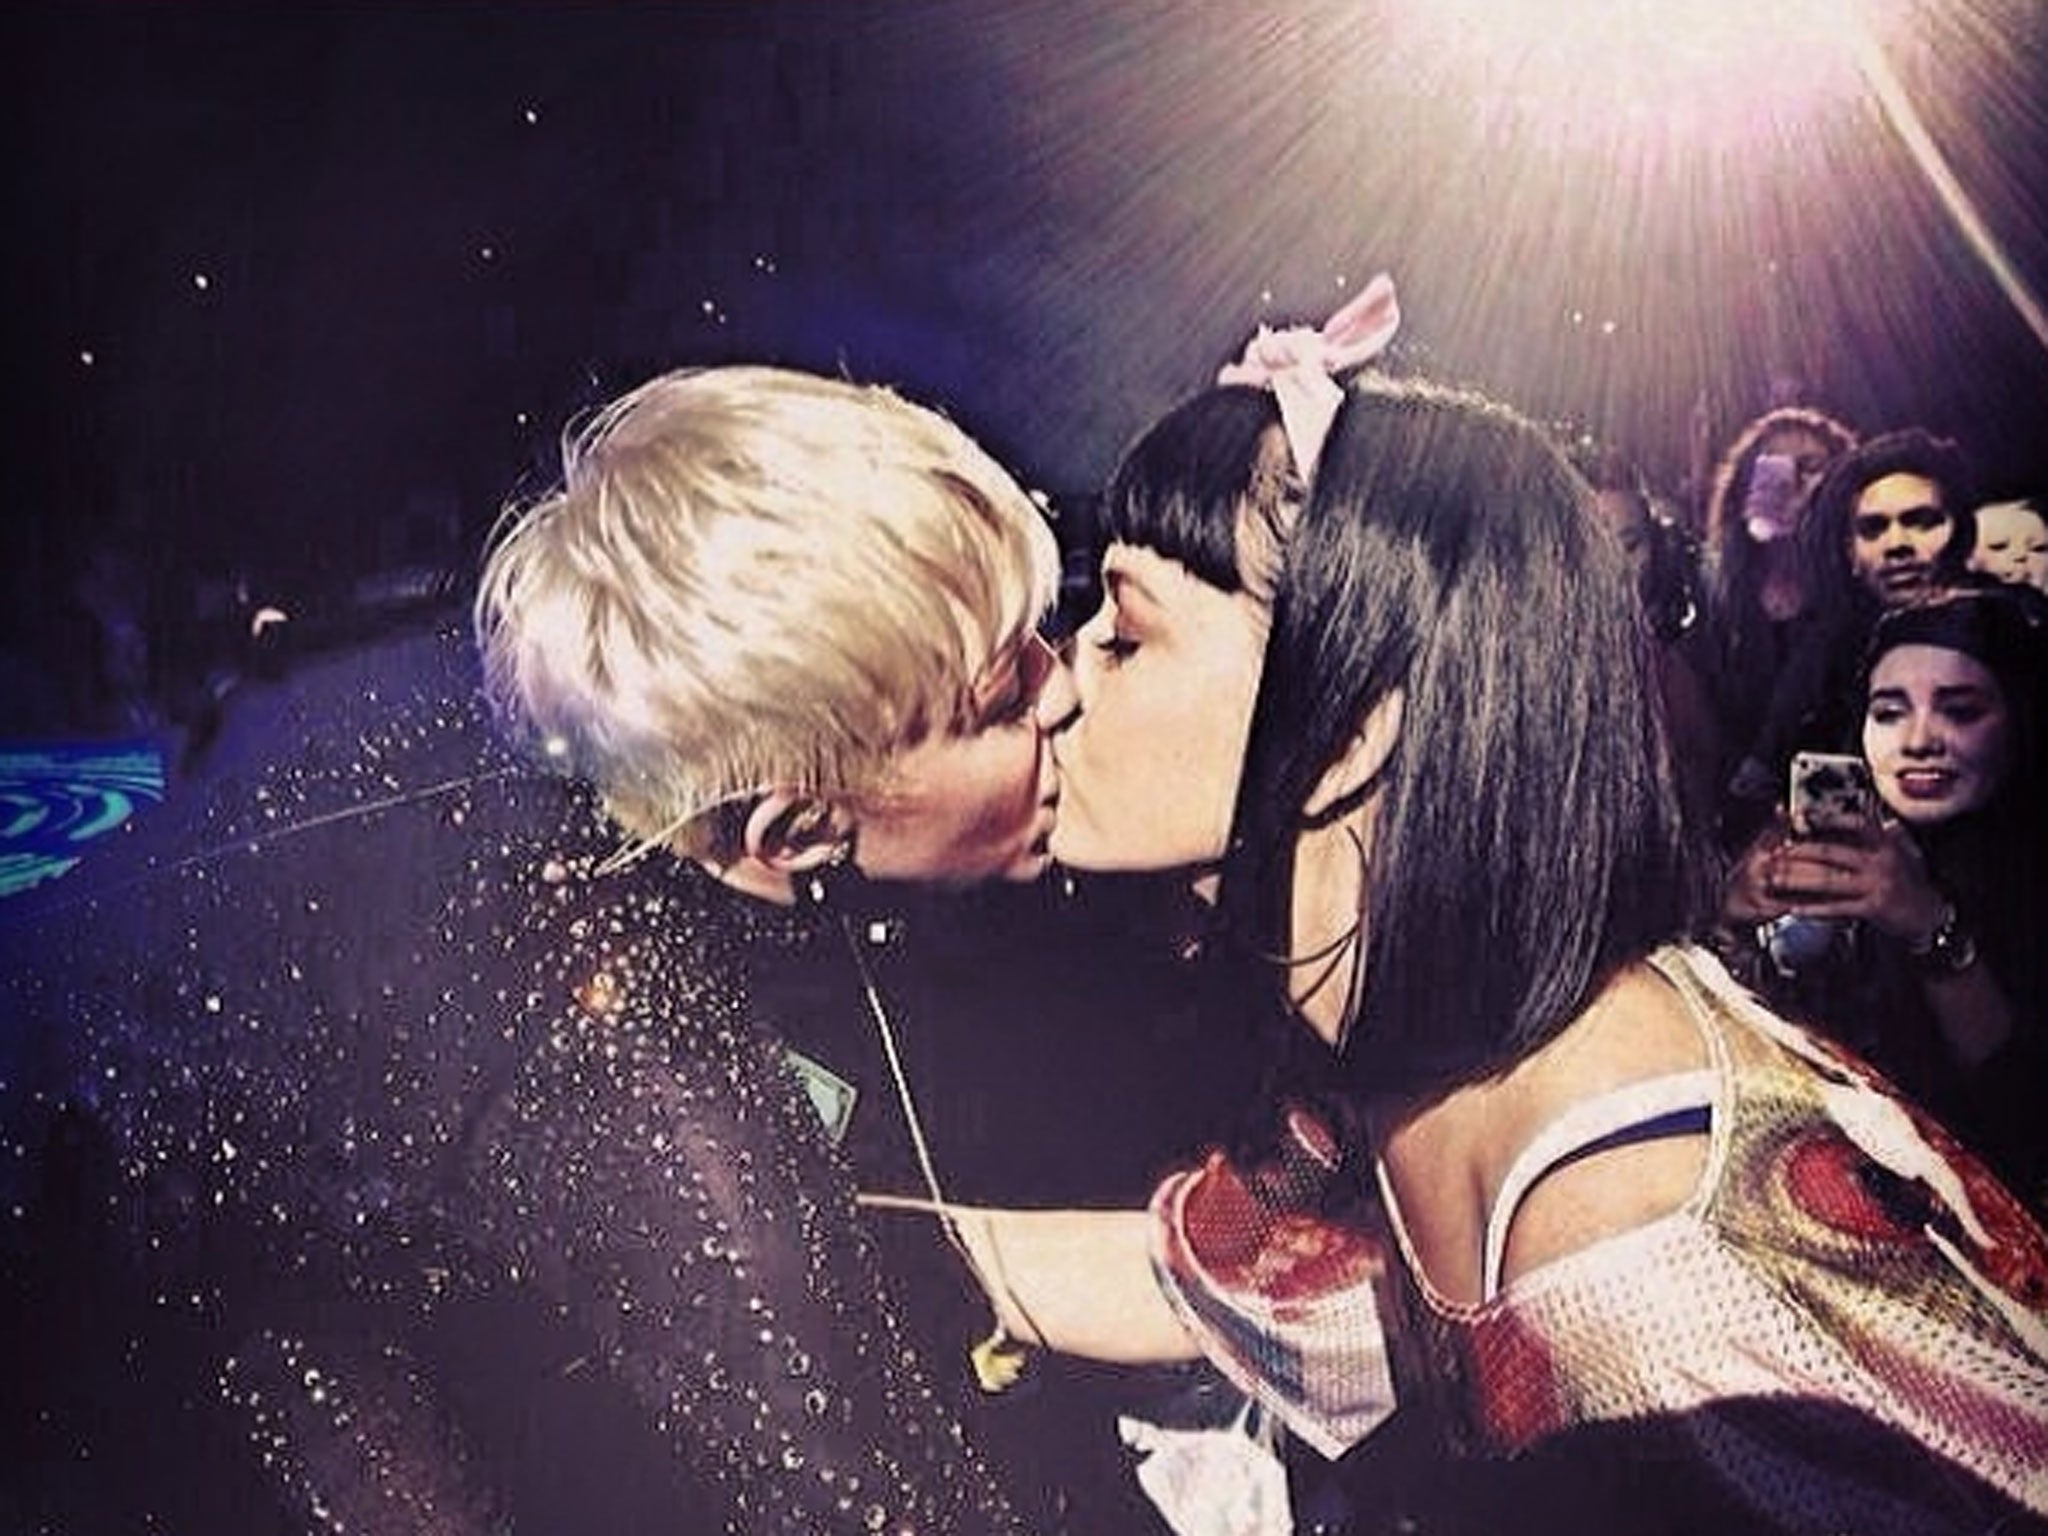 lady gaga kissing katy perry on the lips